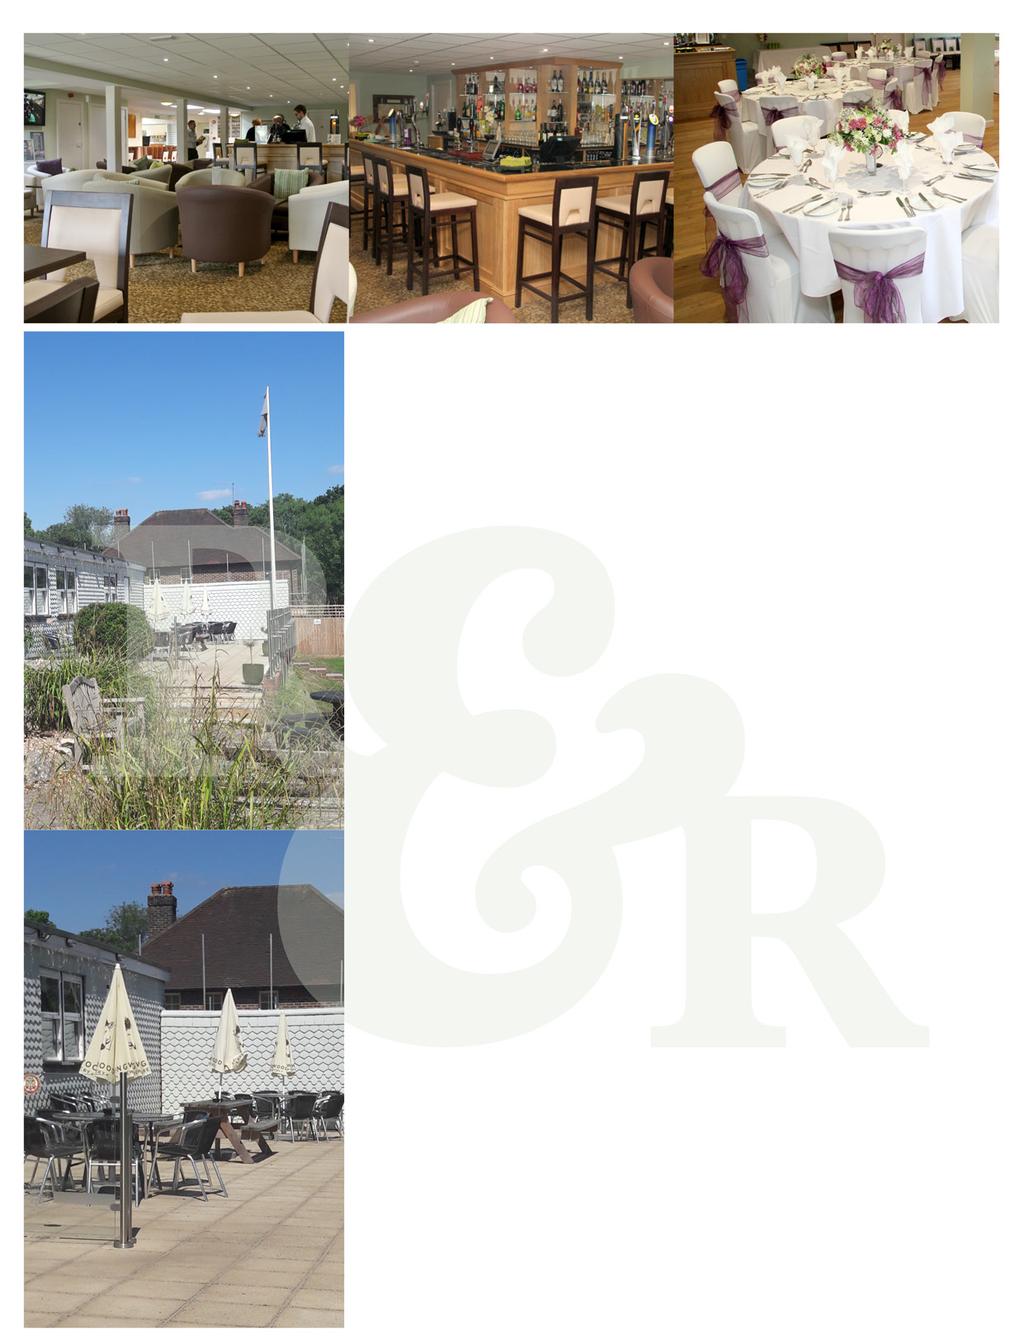 The Venue Redhill & Reigate Golf Club is an ideal venue for your function.